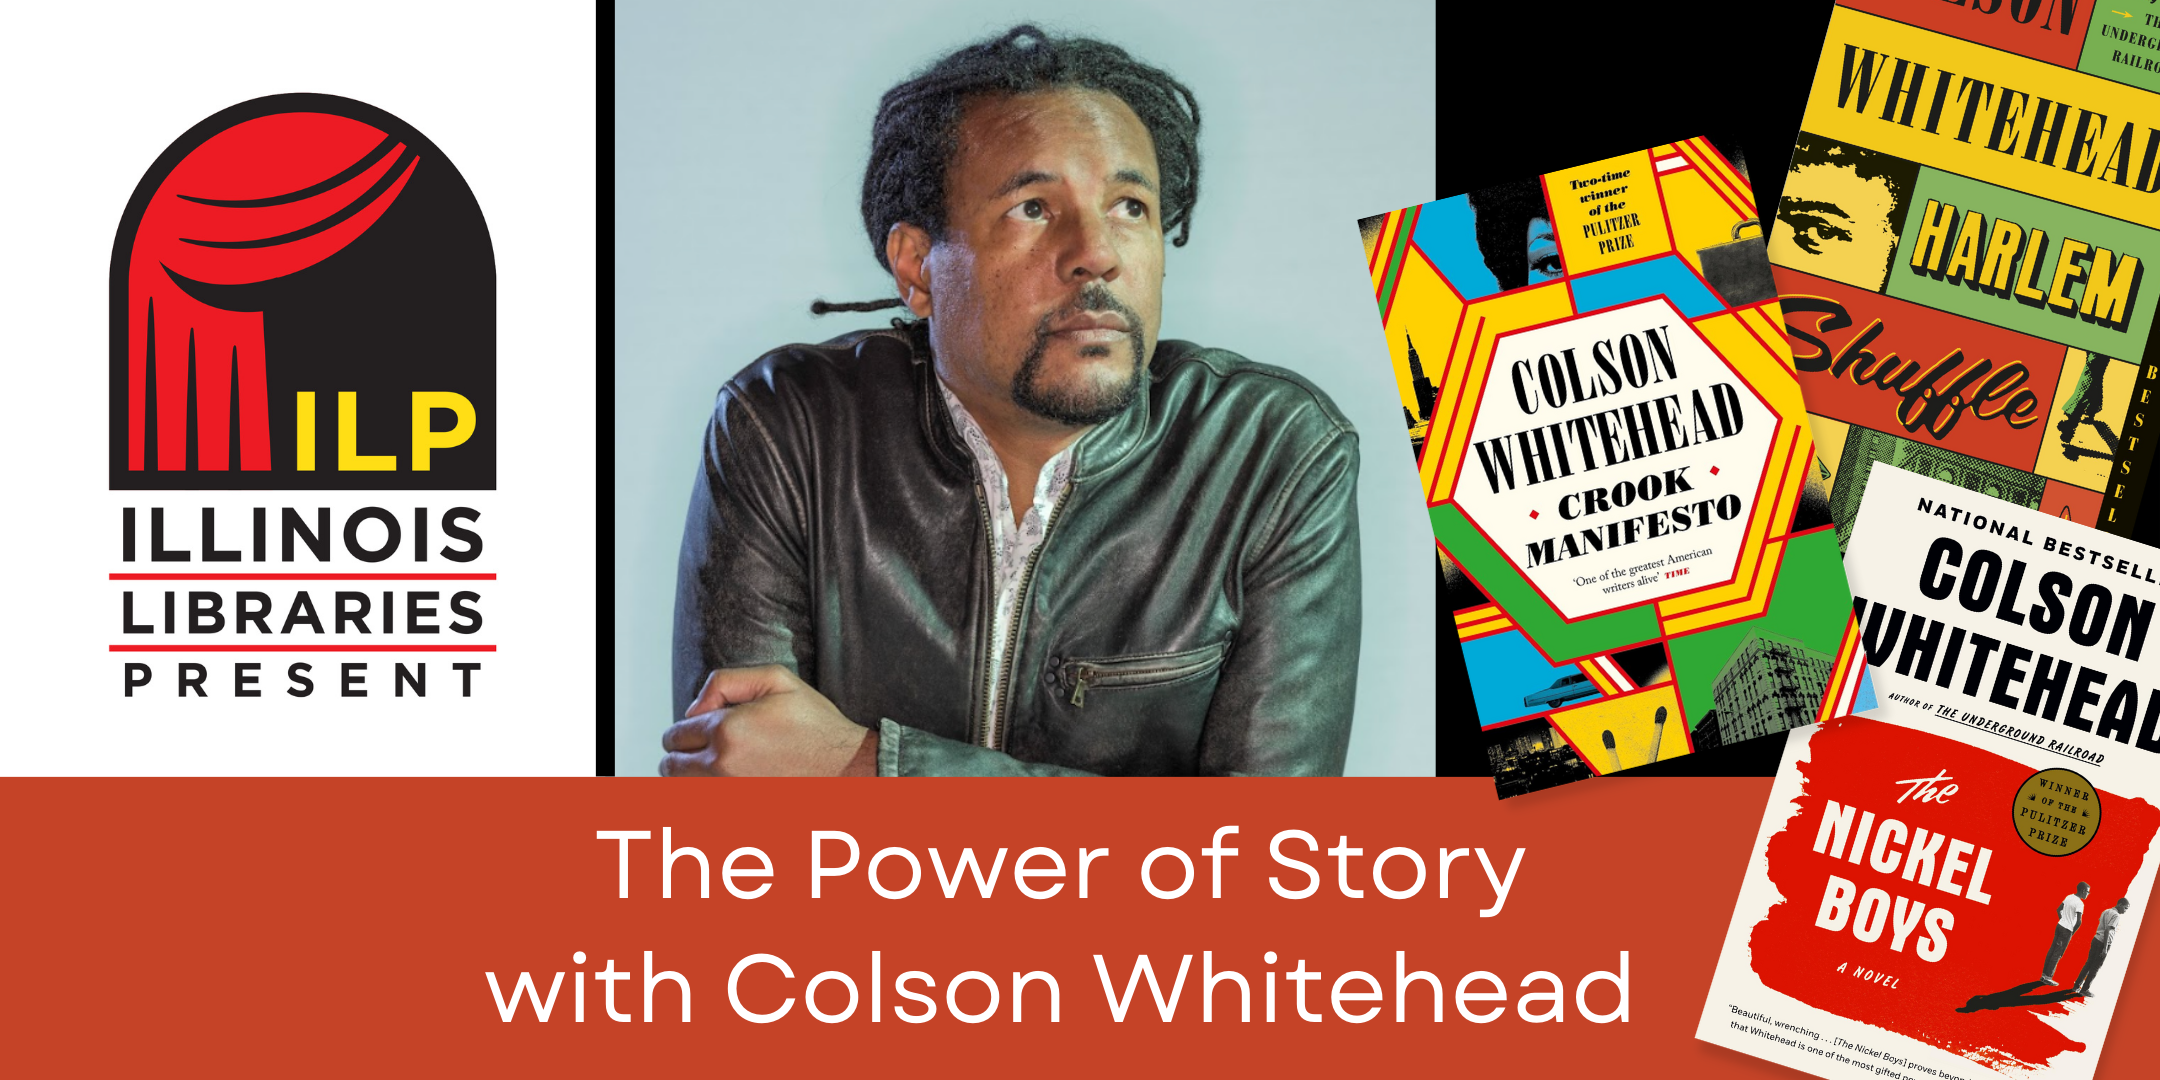 image of author Colson Whitehead and three of his books "Crook Manifesto," "Harlem Shuffle," and "The Nickel Boys" with text stating The Power of Story with Colson Whitehead and the Illinois Libraries Present Logo to the left of the image